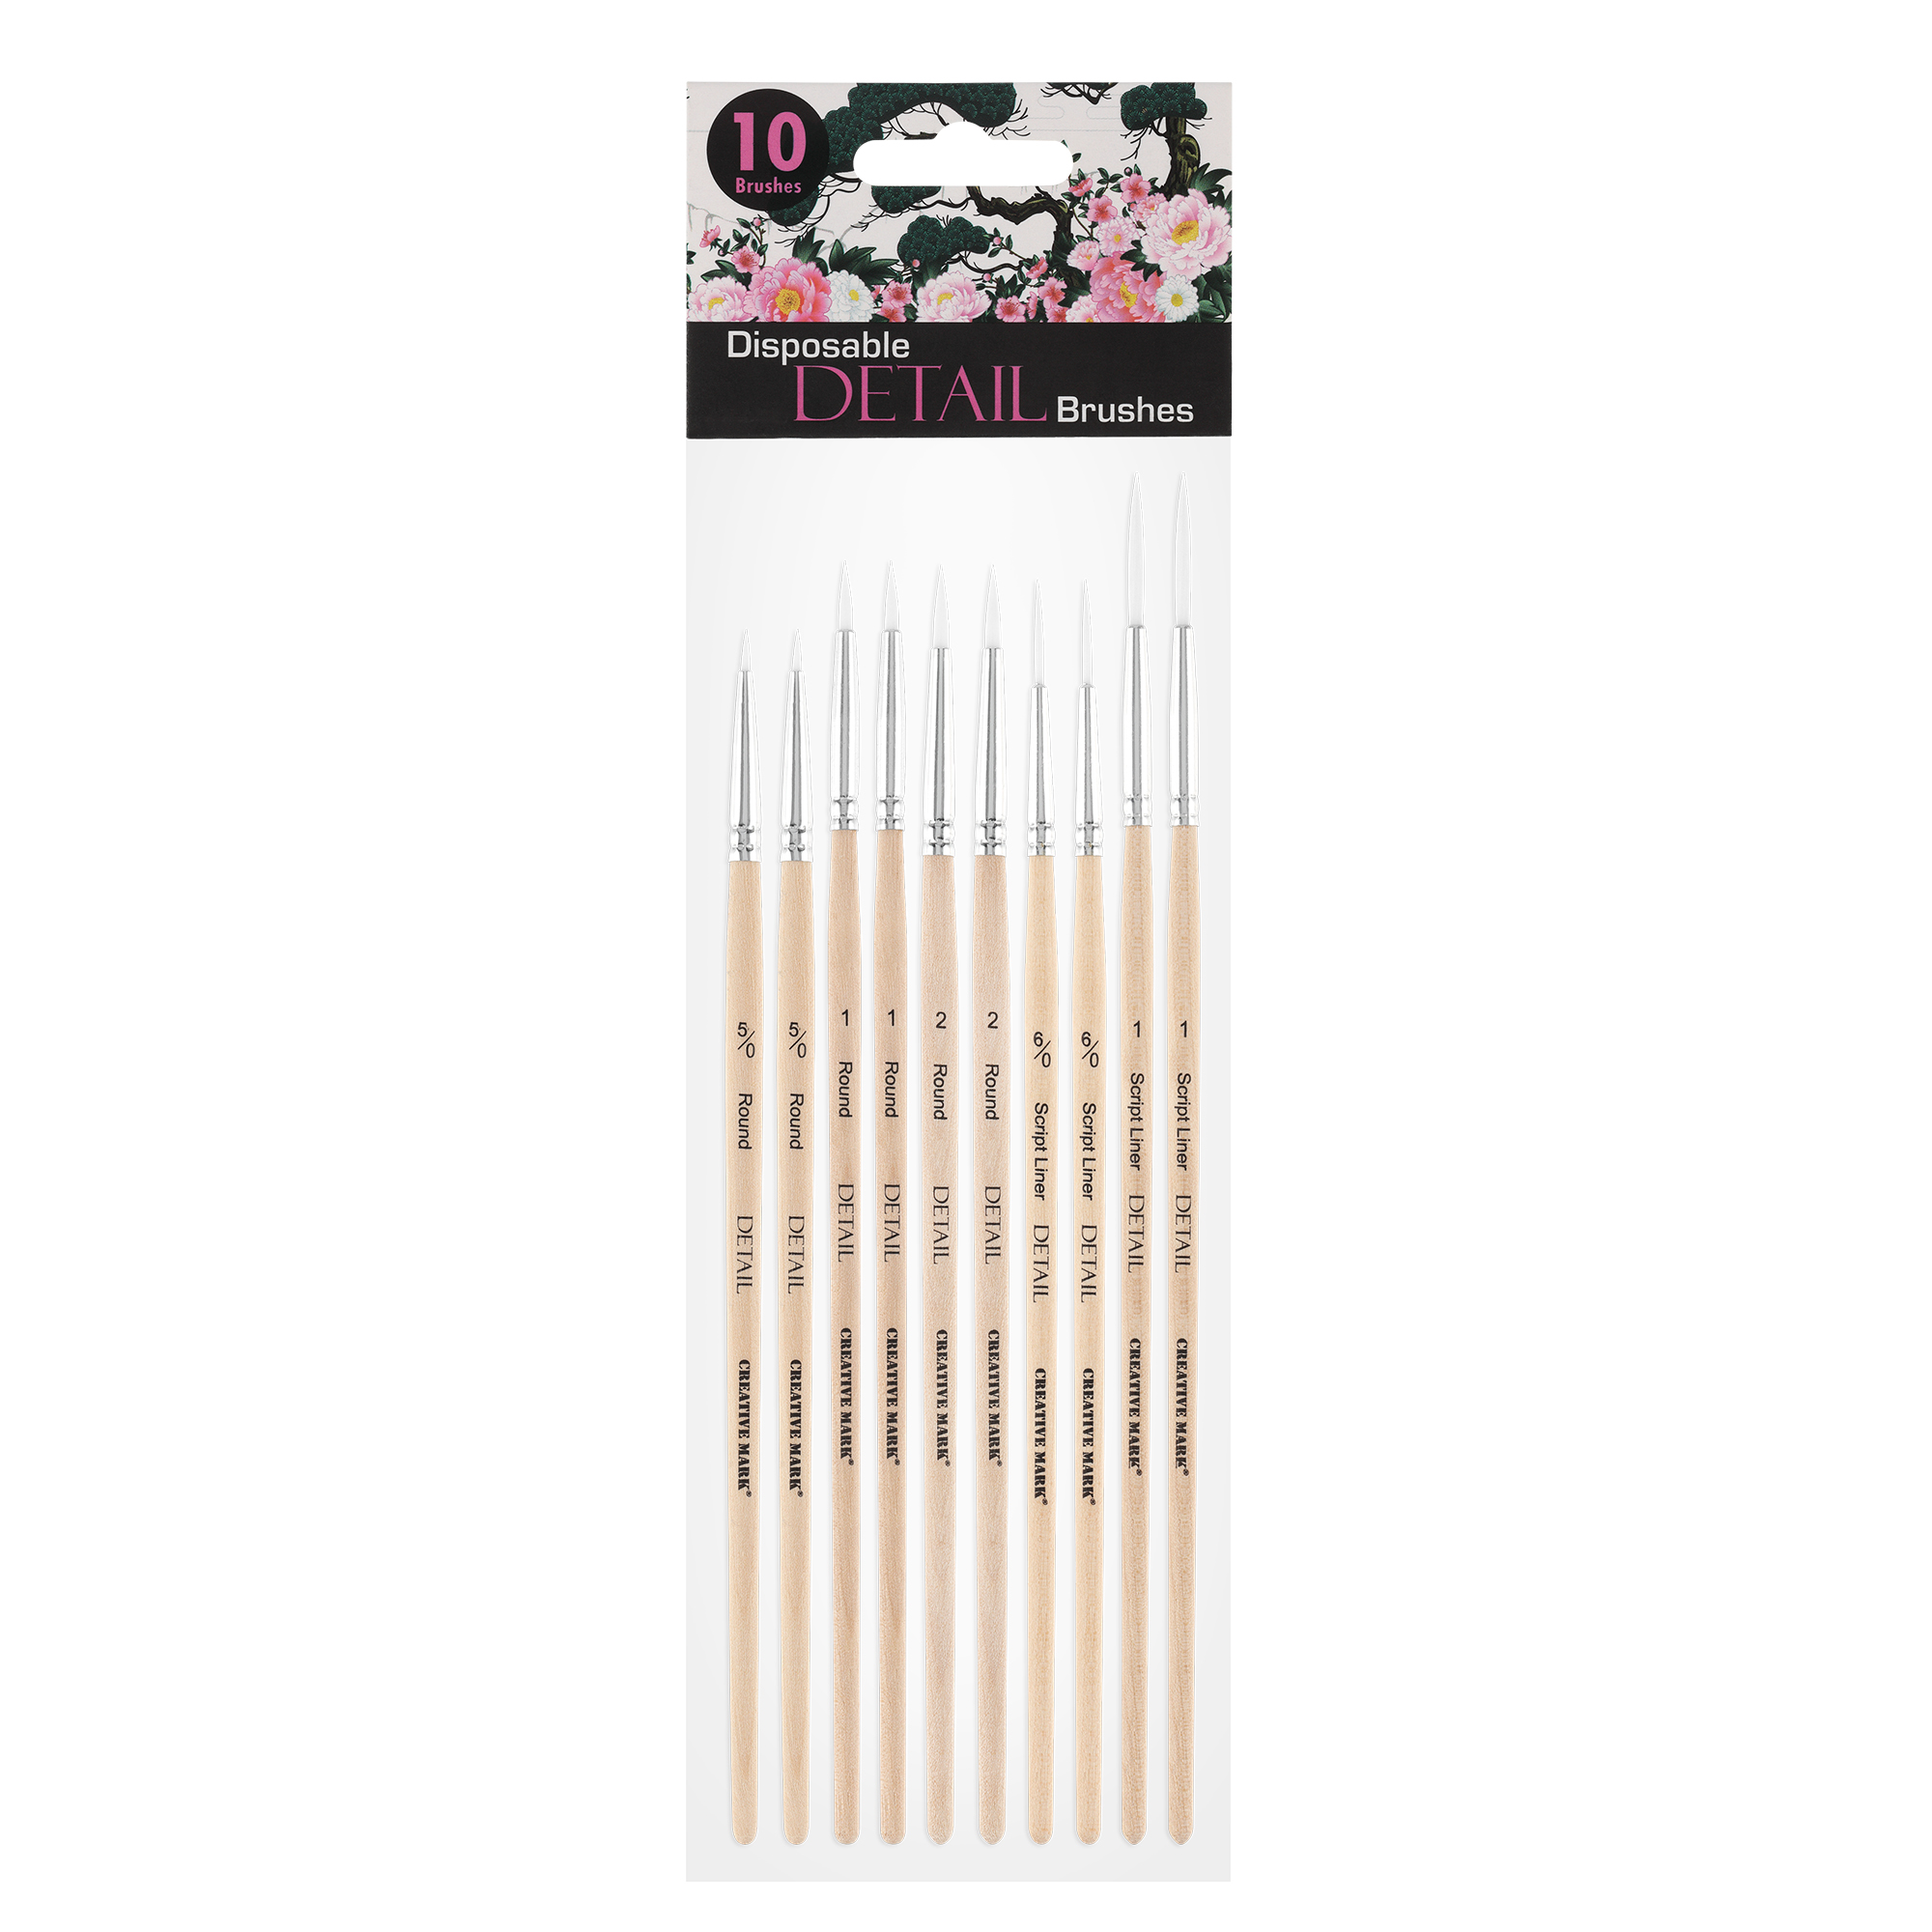 Creative Mark Disposable Detail Brushes - Disposable Detail Brushes for  One-Time Use Painting, Commissions, Teachers, Classrooms, & More! - Set of  10